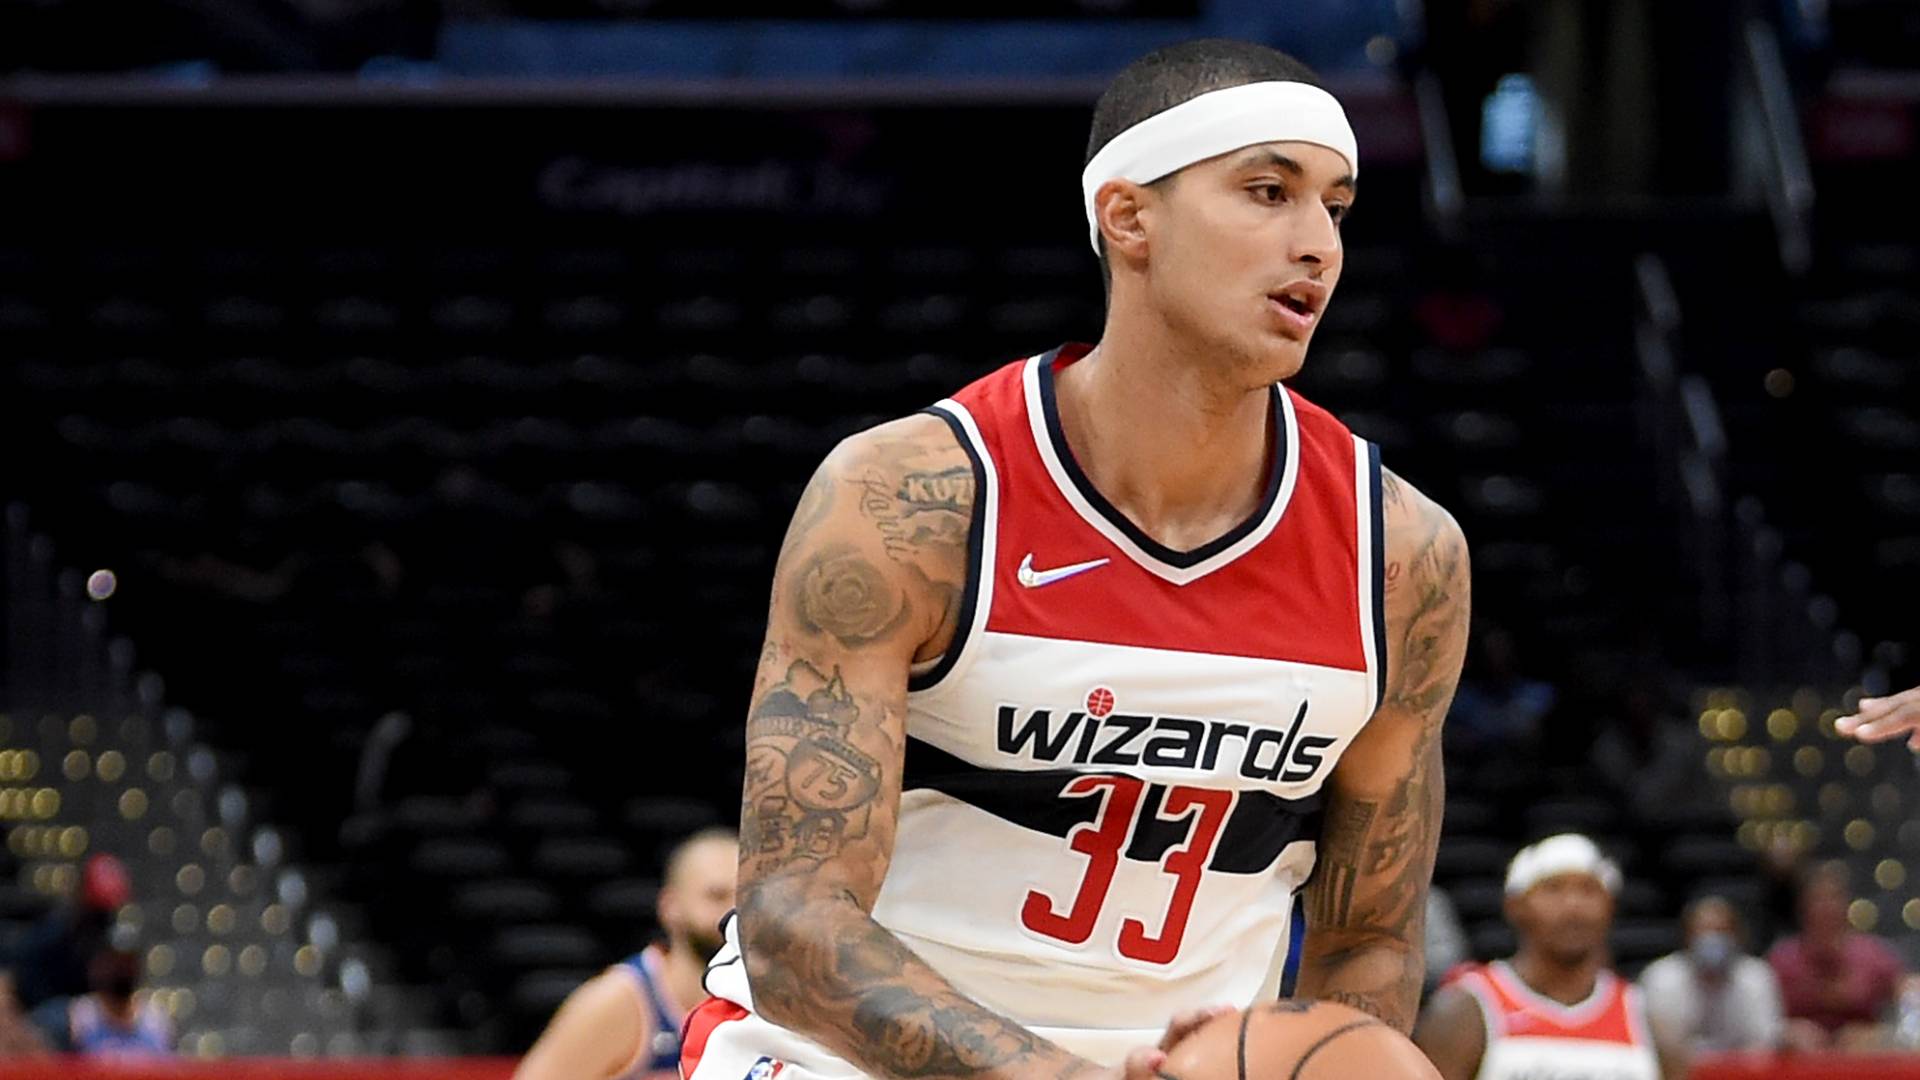 Wizards forward Kyle Kuzma's recent streak shows flashes of the player he was meant to be